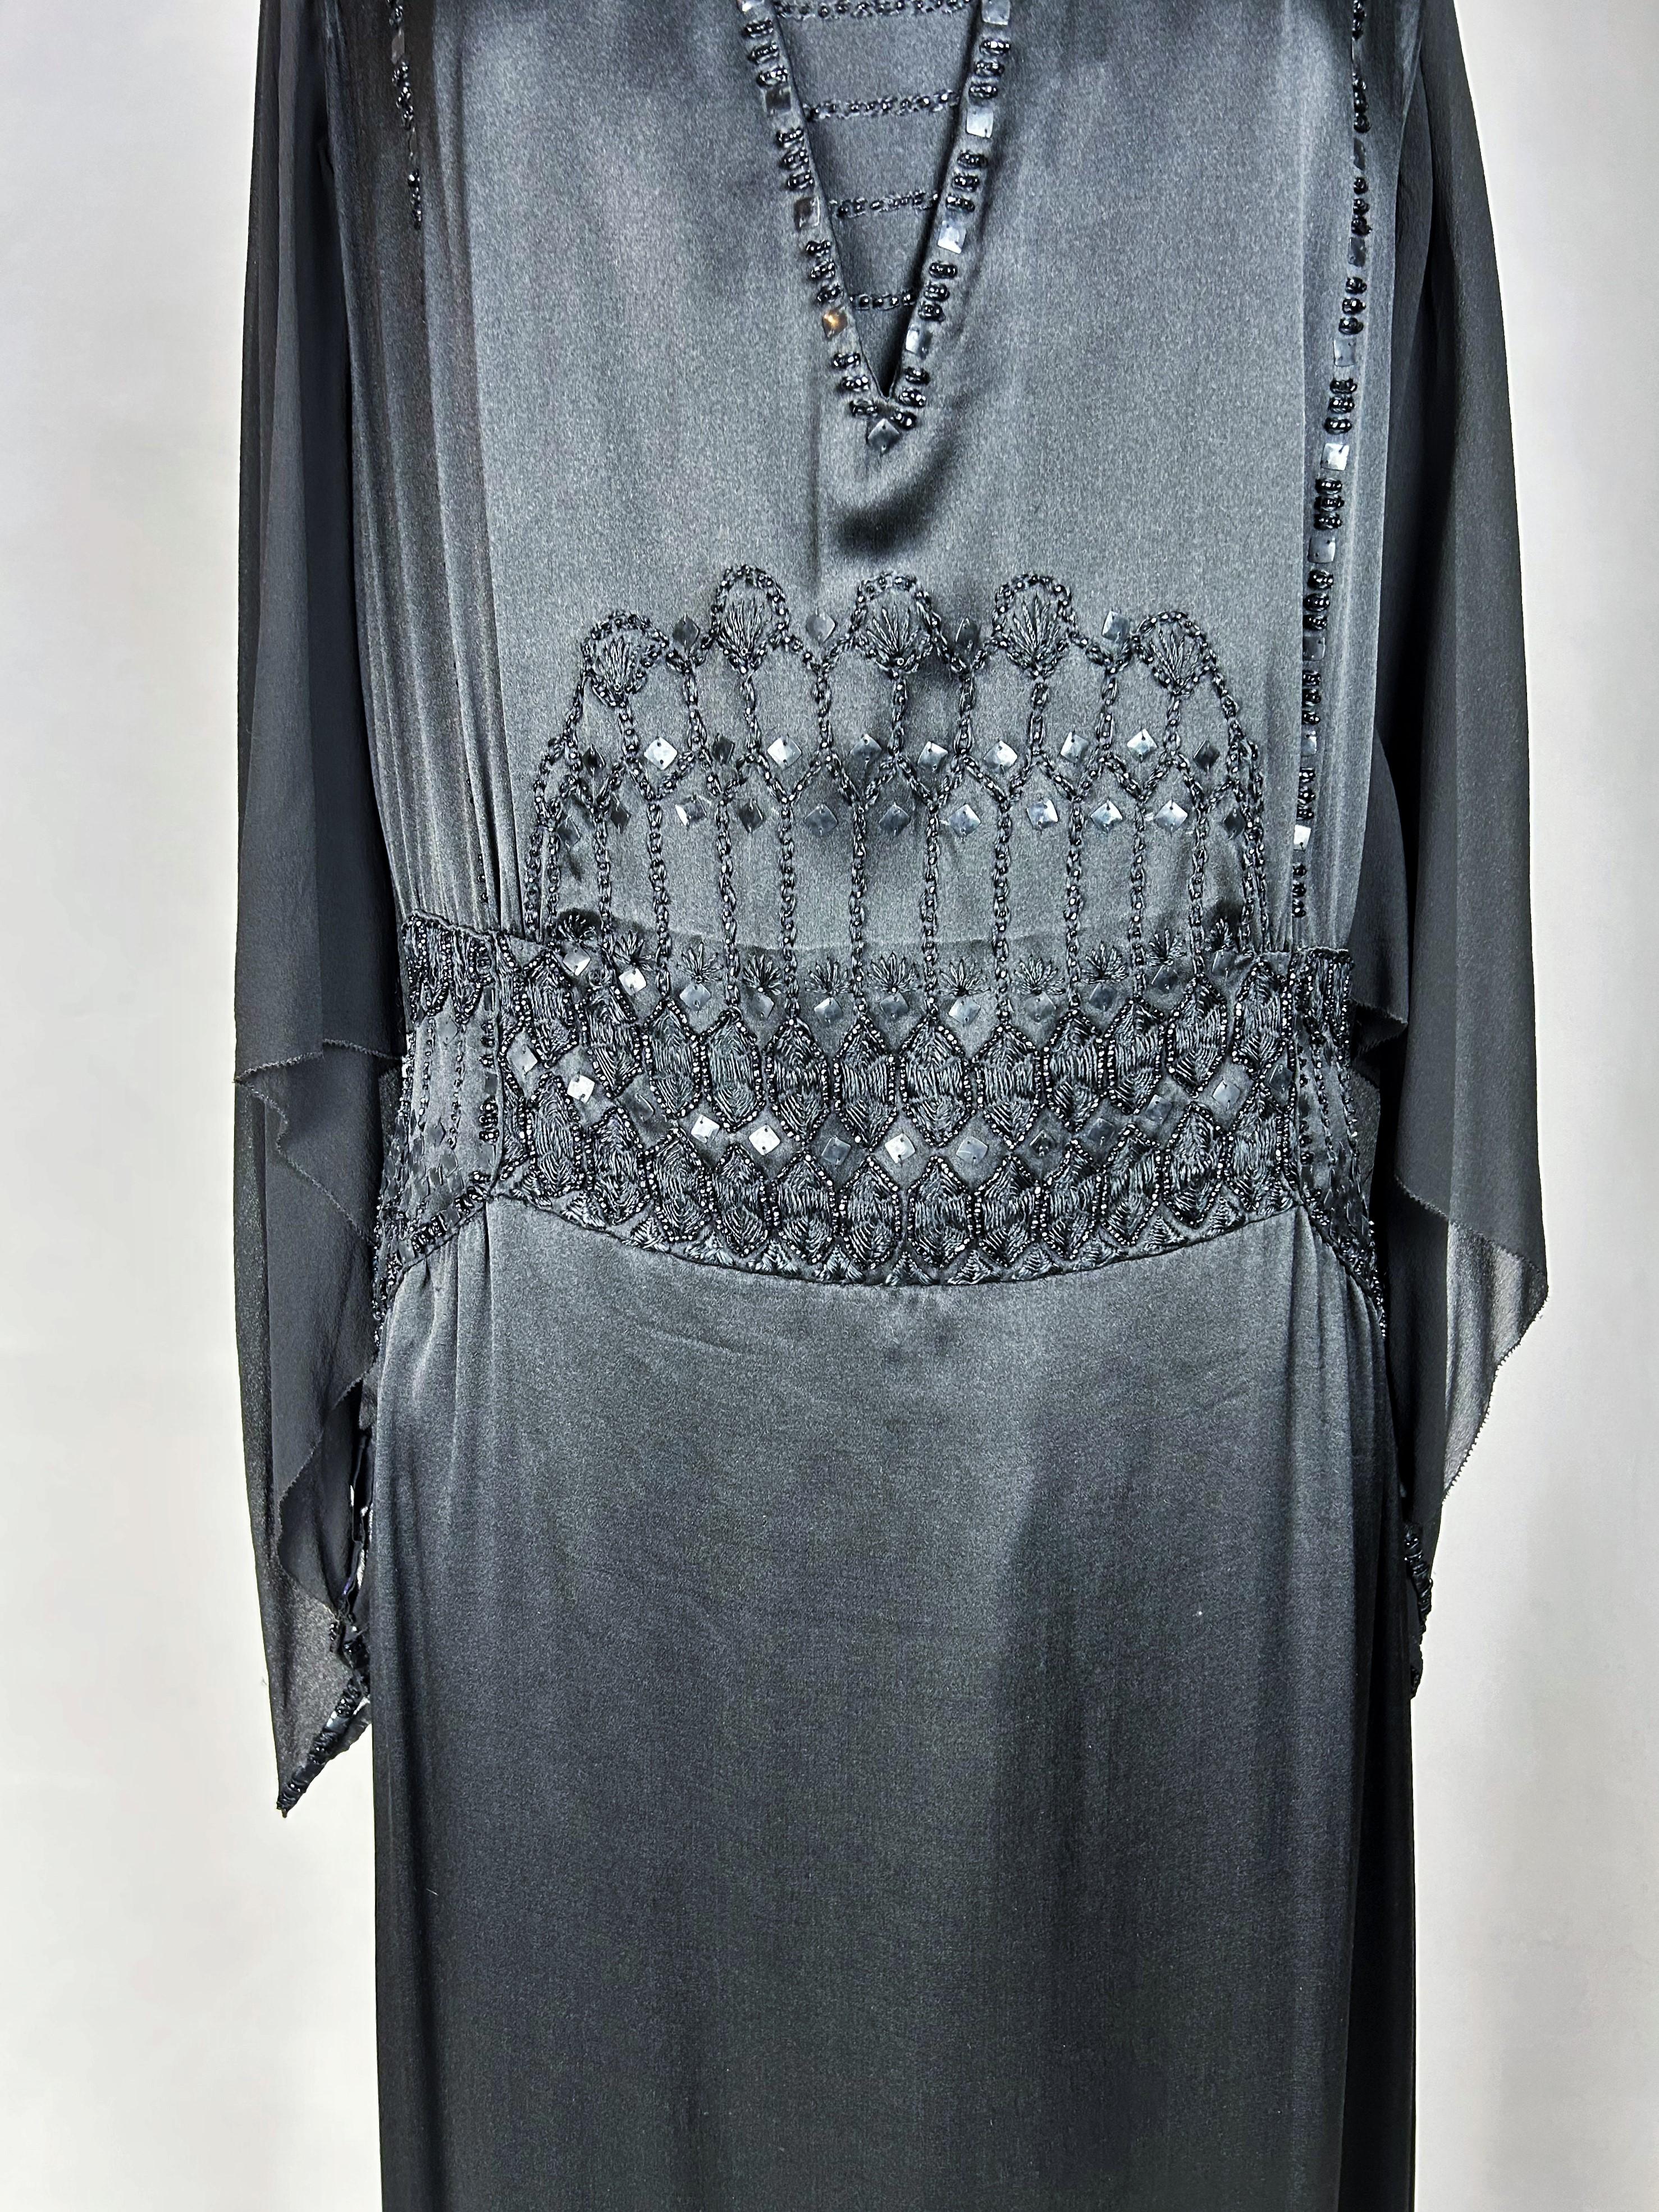 Women's Long evening dress in embroidered satin and chiffon - Paris Circa 1920 For Sale